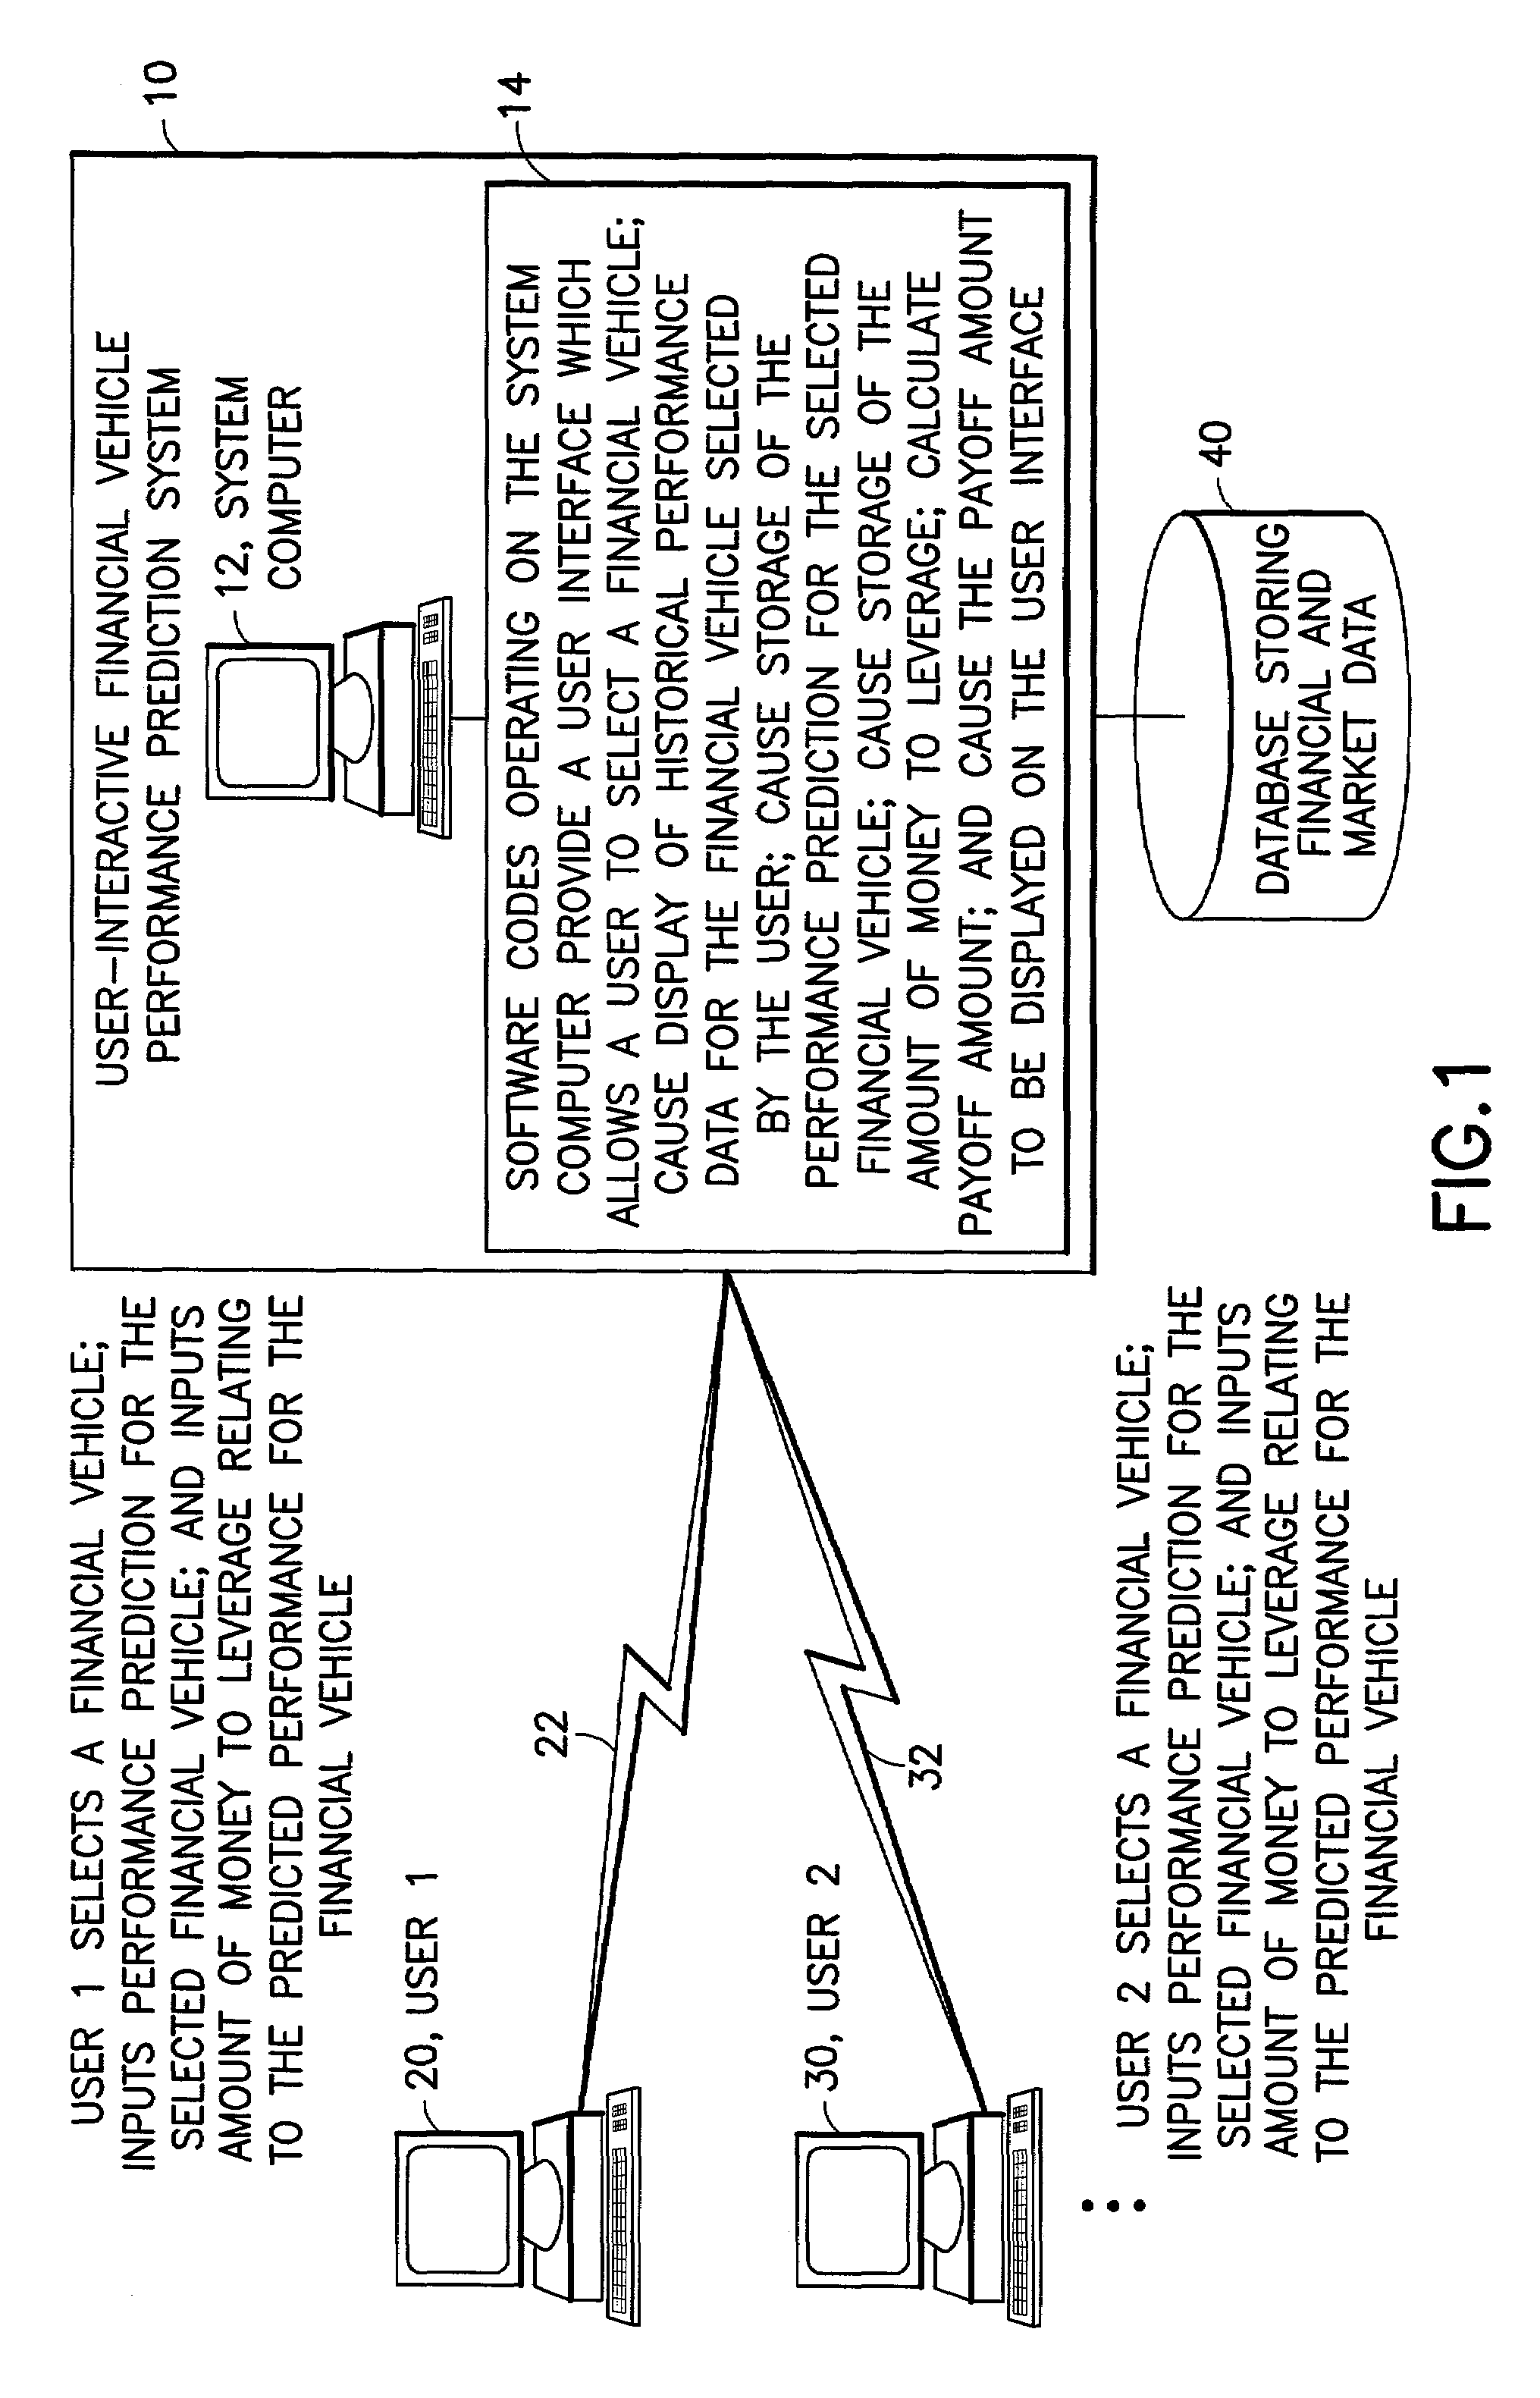 User-interactive financial vehicle performance prediction, trading and training system and methods